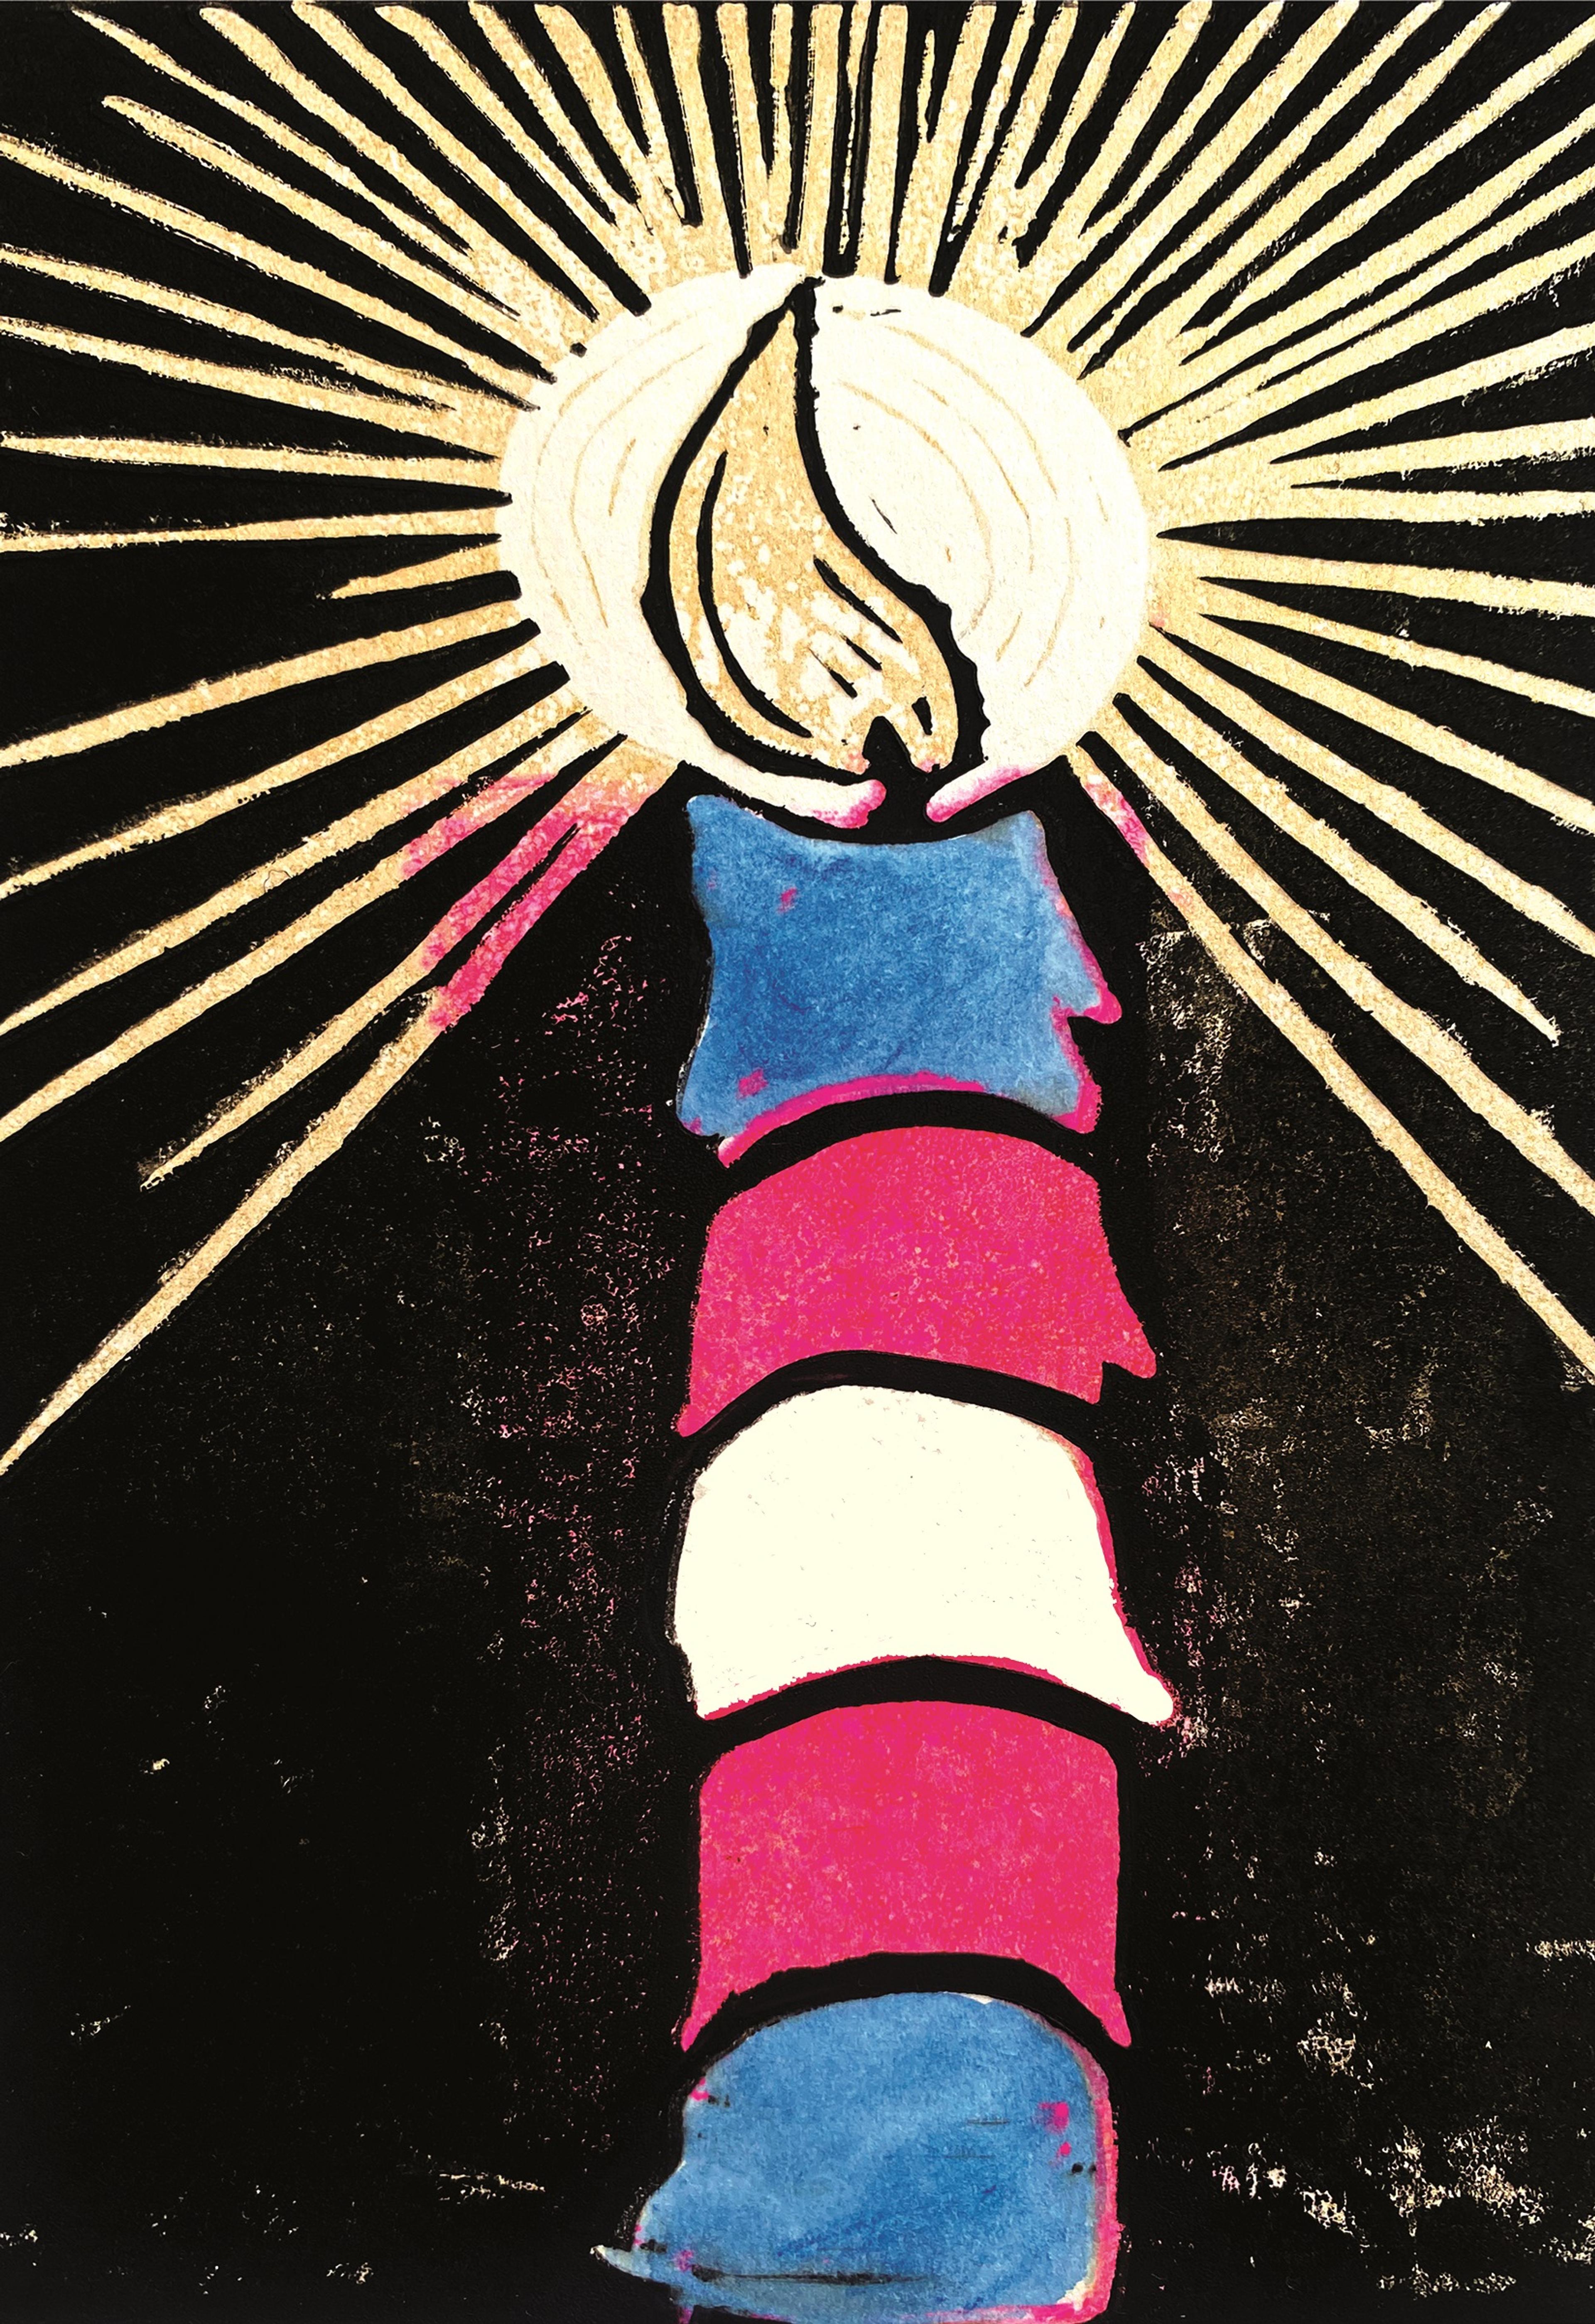 Illustration of a pink and blue striped candle with a starburst flame